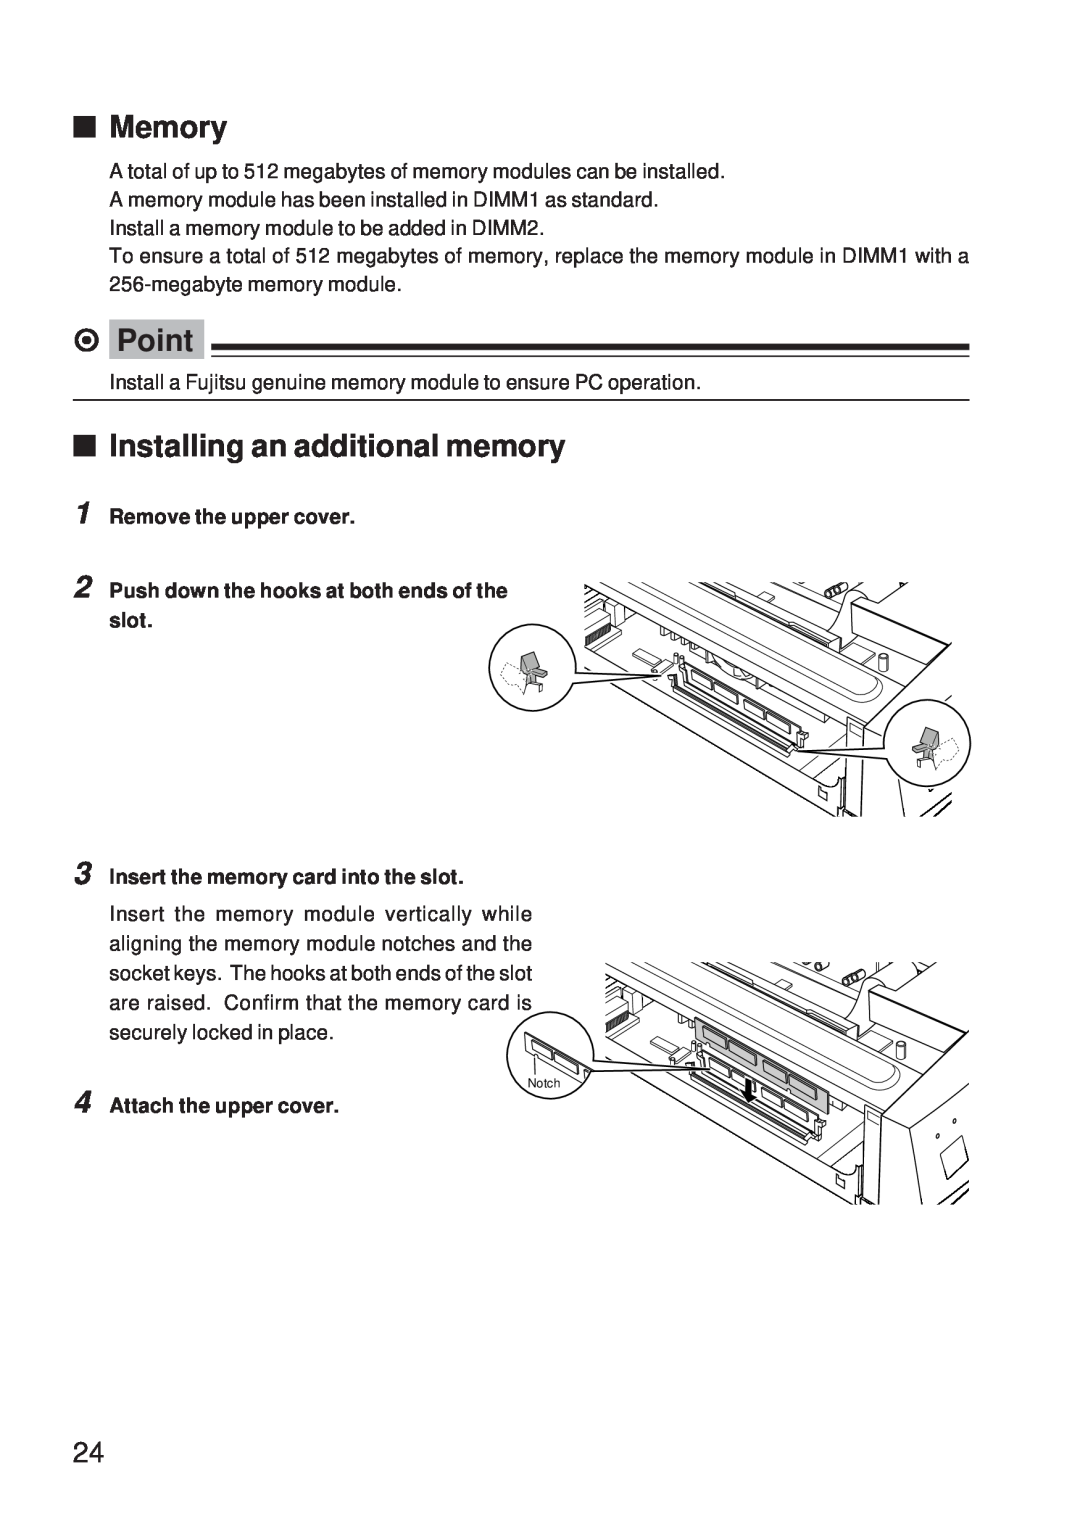 Fujitsu 5000 Memory, Installing an additional memory, Remove the upper cover, Push down the hooks at both ends of the slot 